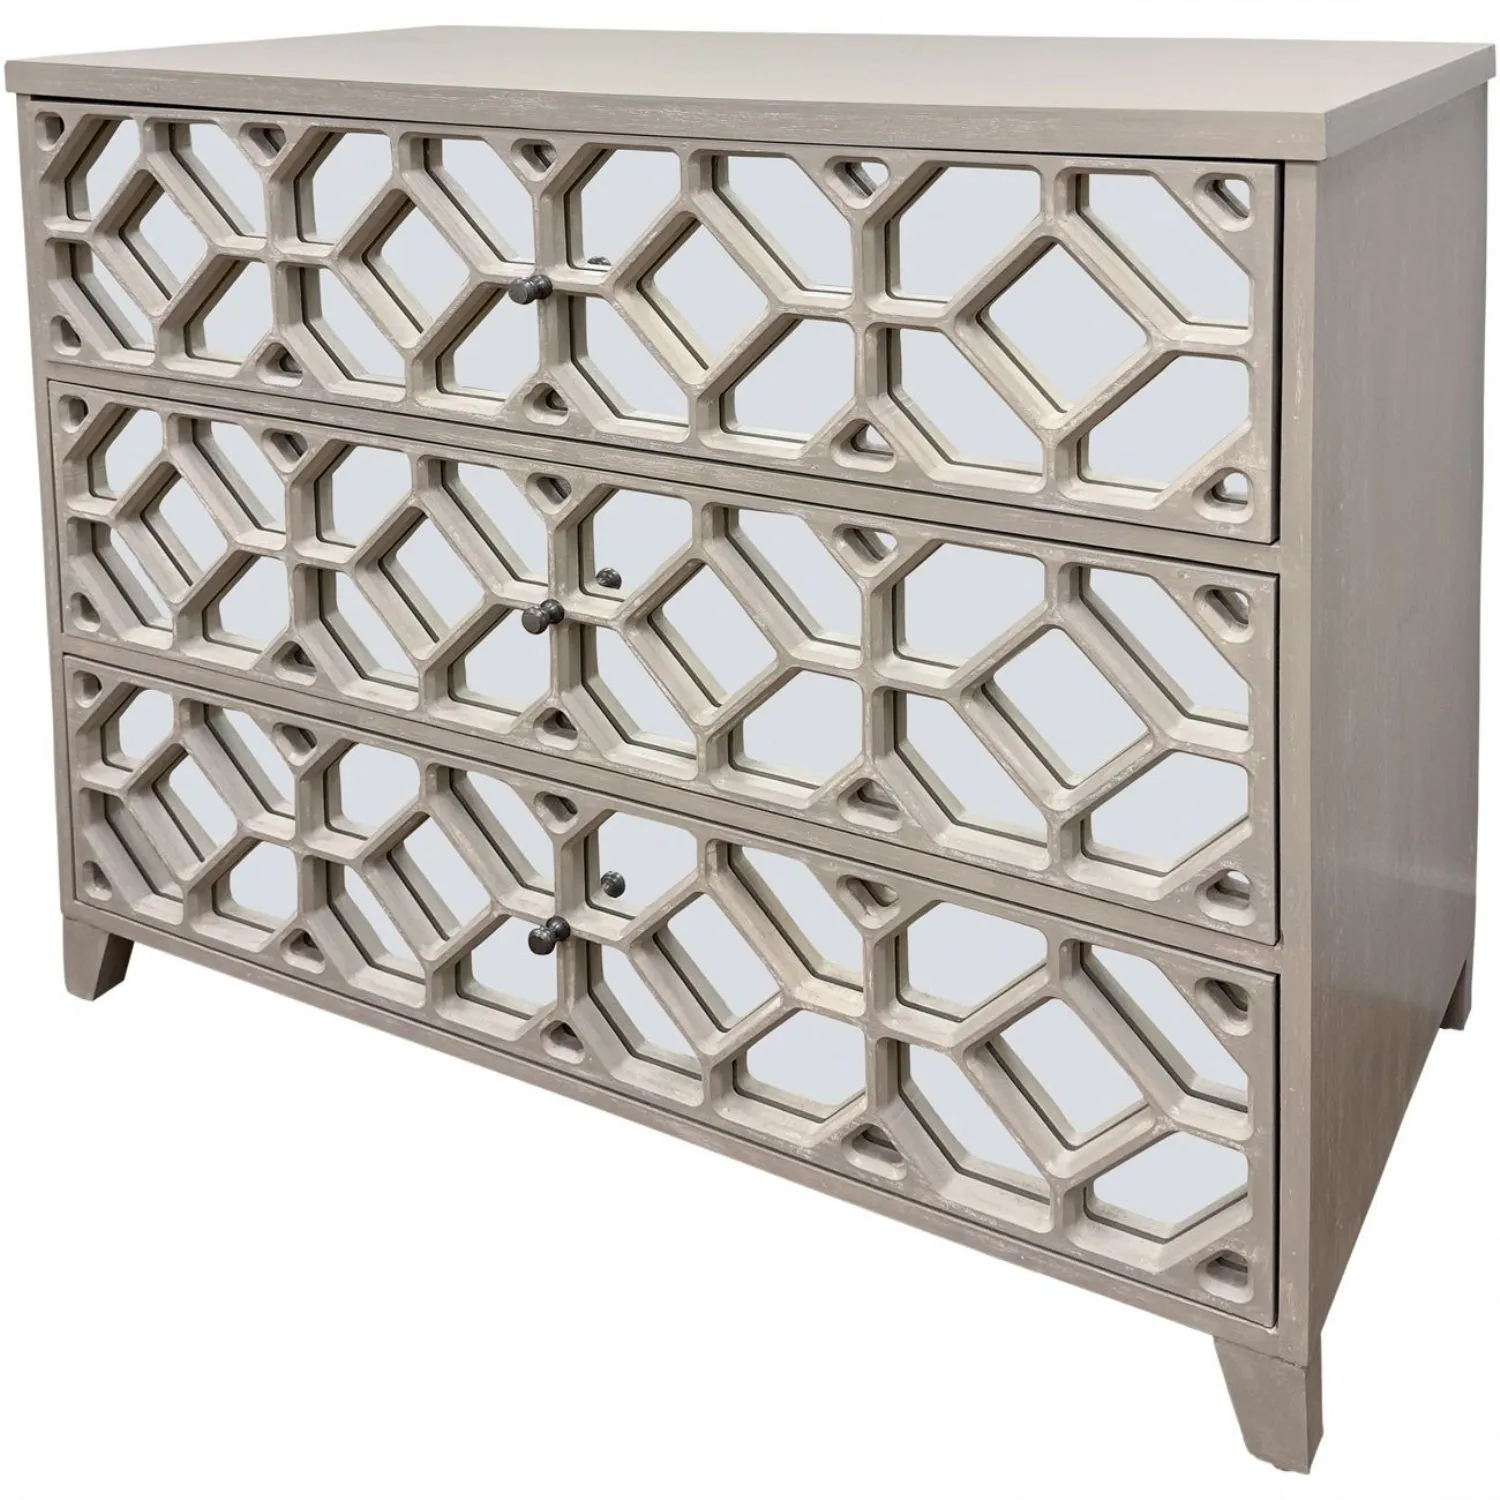 Distressed Grey Fretwork Wooden Chest of 3 Drawers